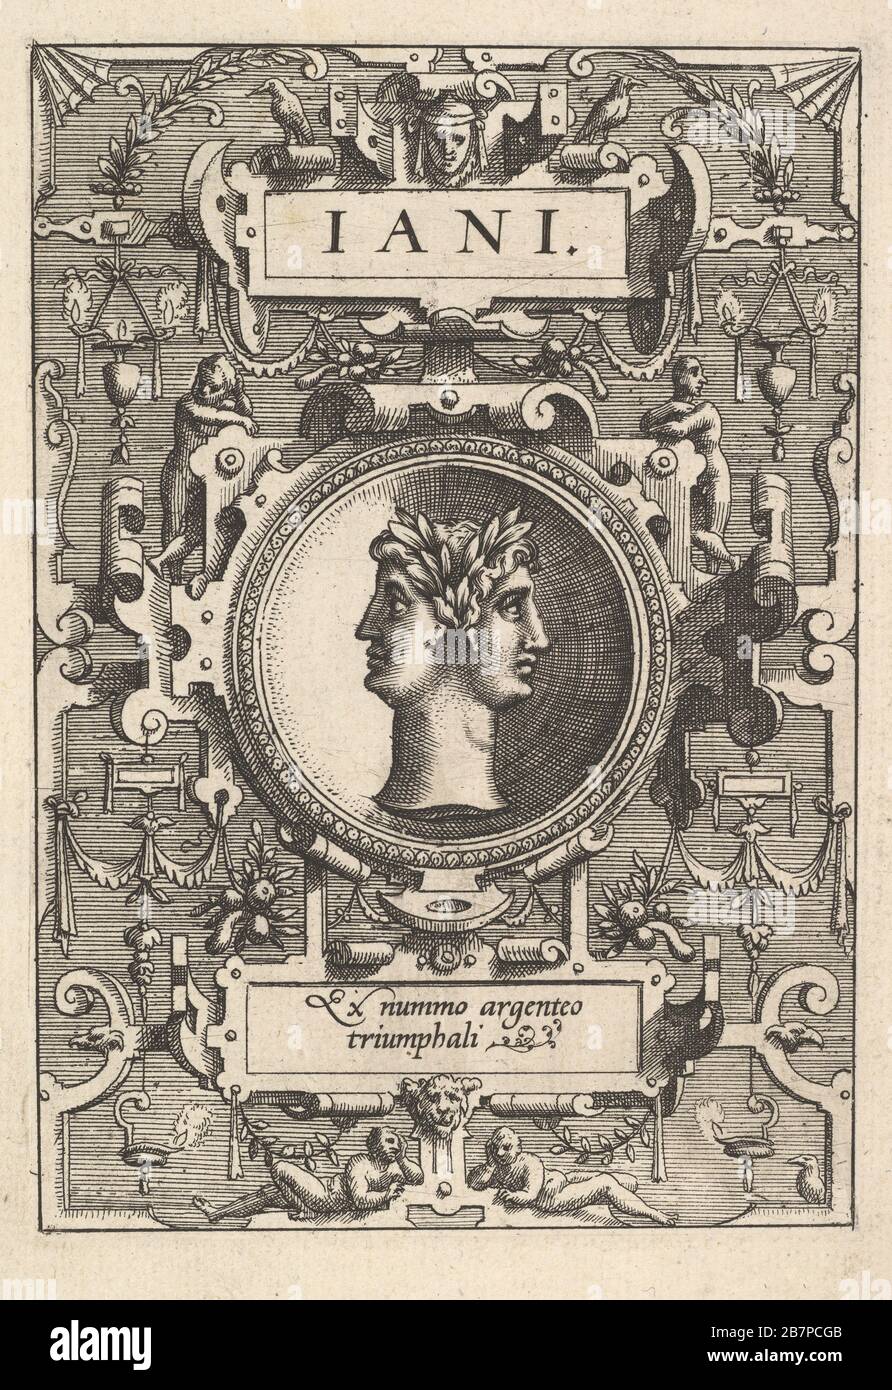 Bust of Janus surrounded by strapwork, from the series 'Deorum dearumque,' a set of images of deities after coins in the collection of Abraham Ortelius, 1573. Stock Photo